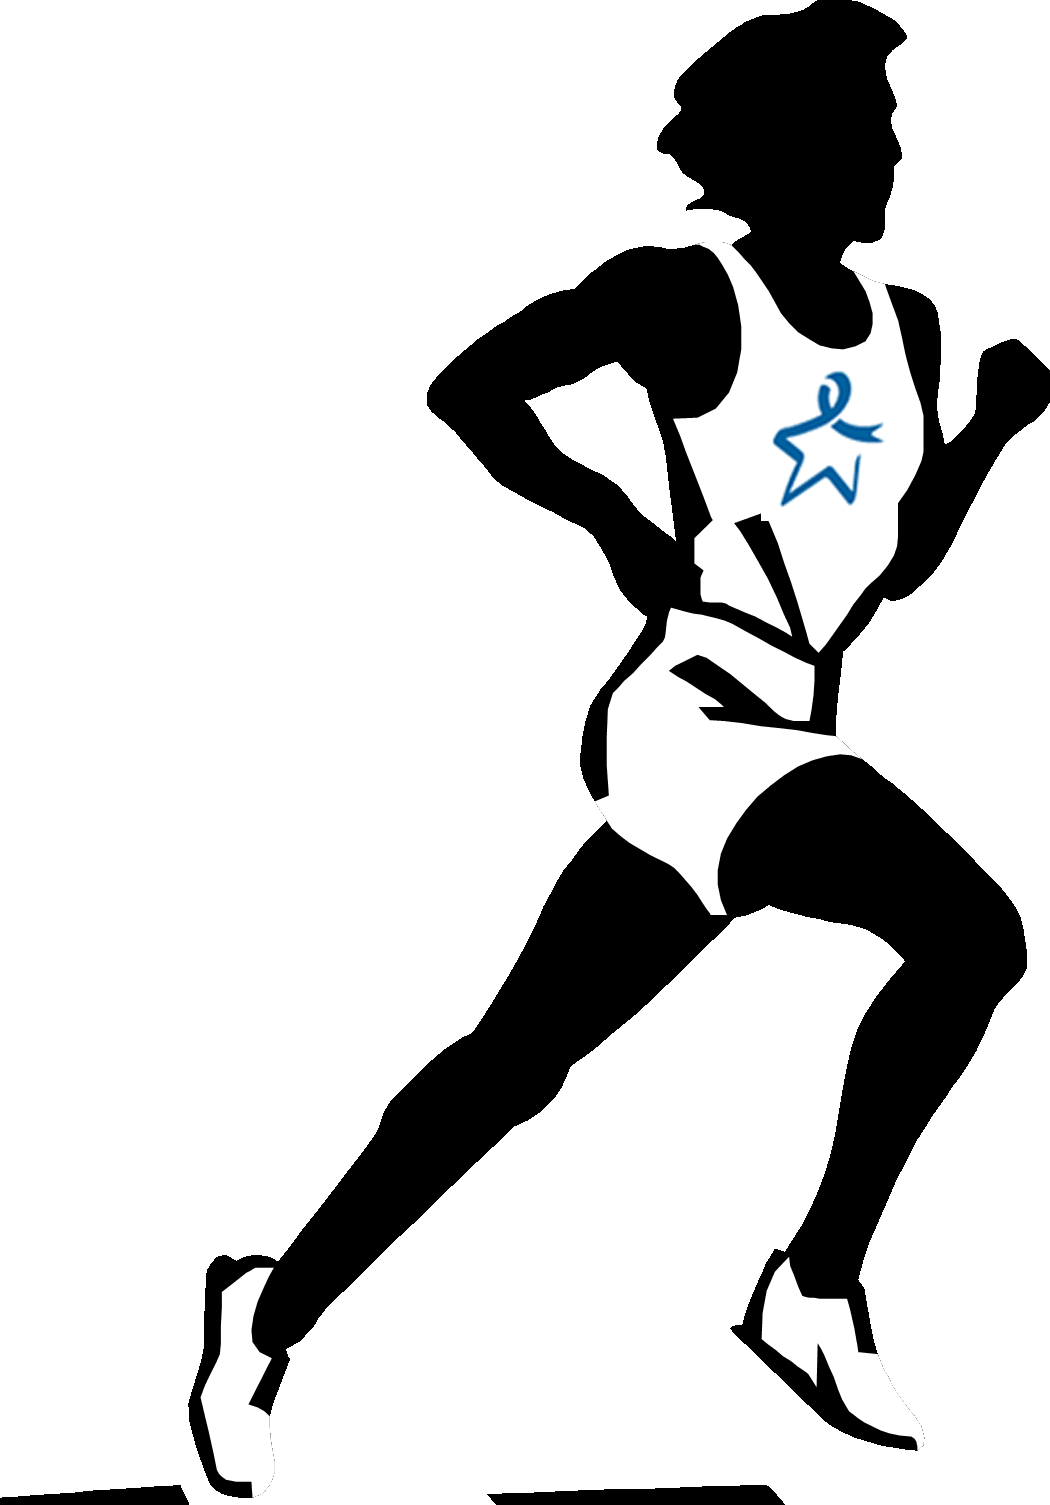 Words clipart track and field. Cross country runner clip